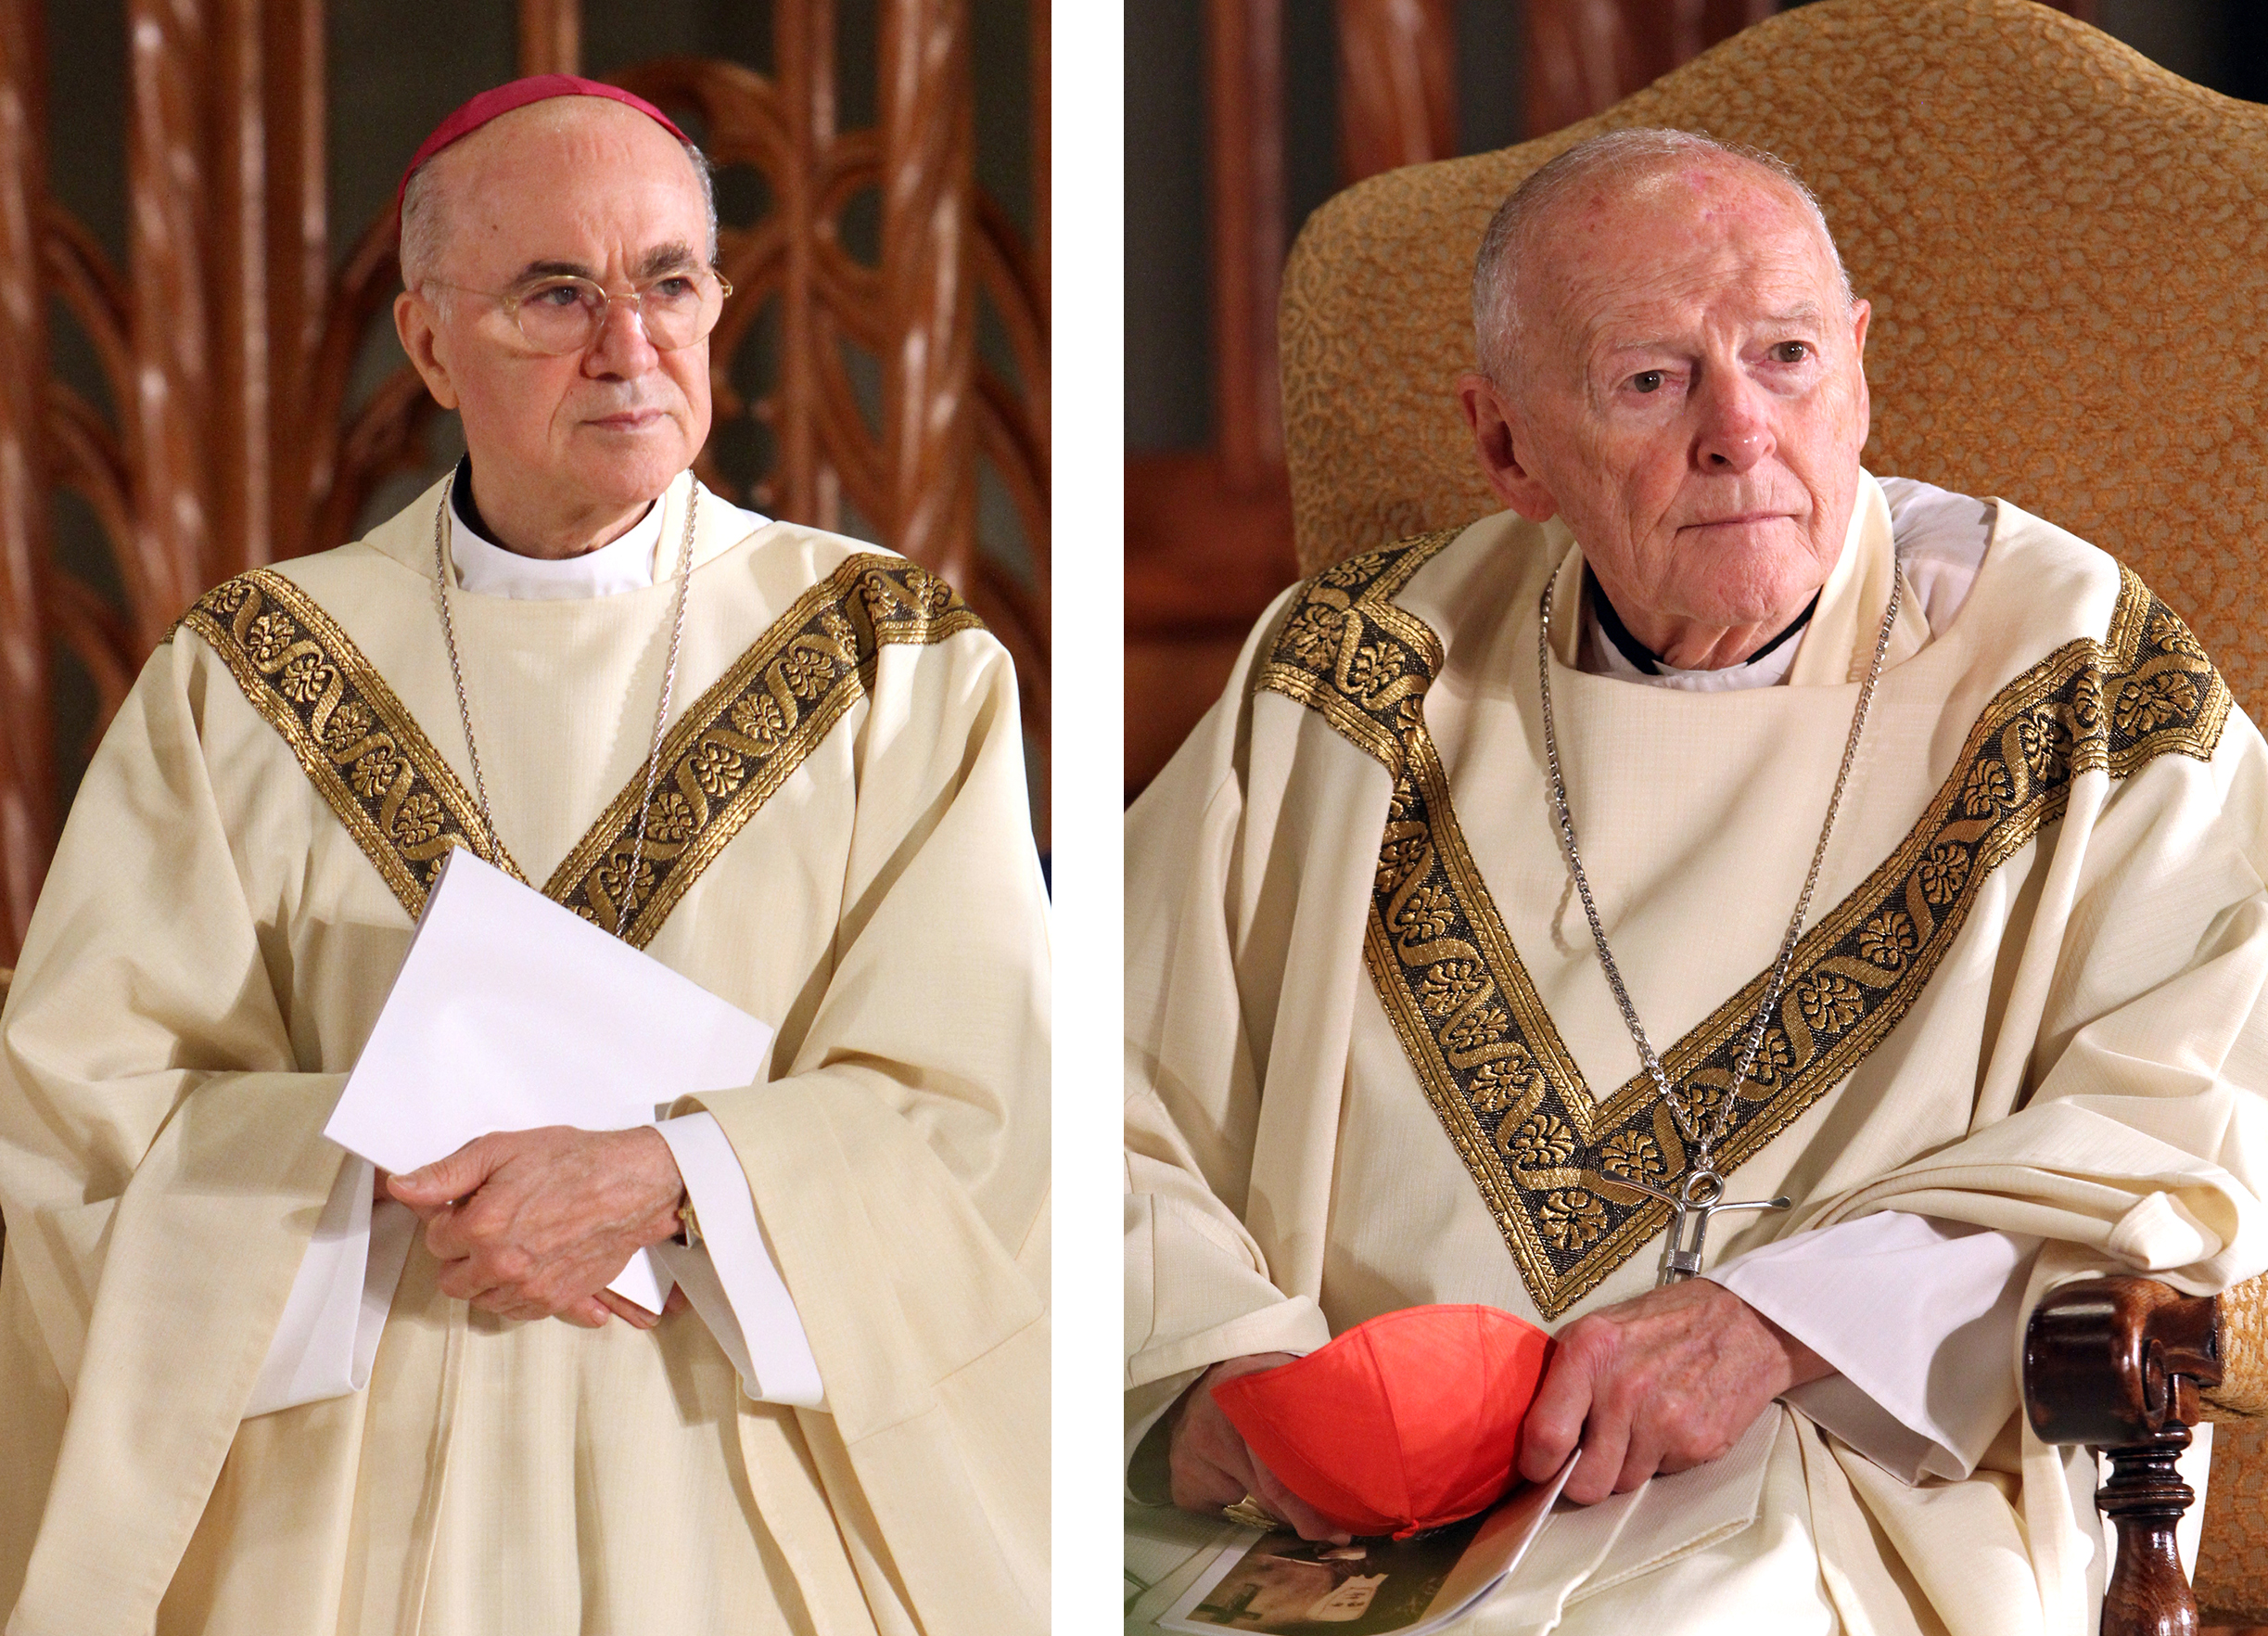 Archbishop Carlo Maria Vigano, then nuncio to the United States, and then-Cardinal Theodore E. McCarrick of Washington, are seen in a combination photo from Oct. 4, 2014. (CNS/Gregory A. Shemitz)